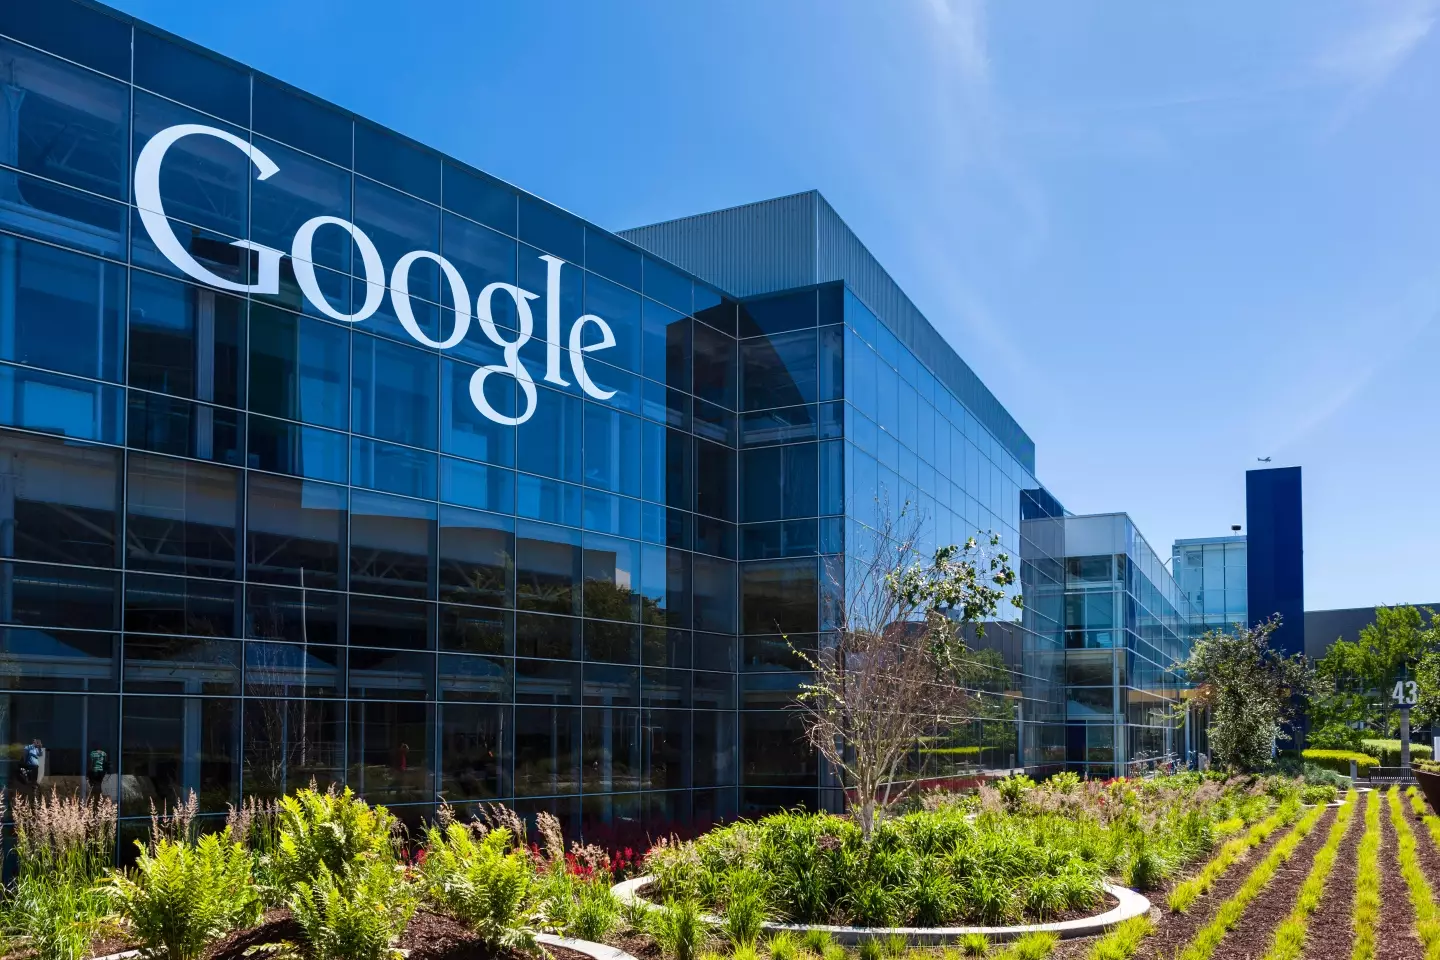 Google has since agreed to a $391.5 million (£330 million) settlement payout with 40 states in the US.